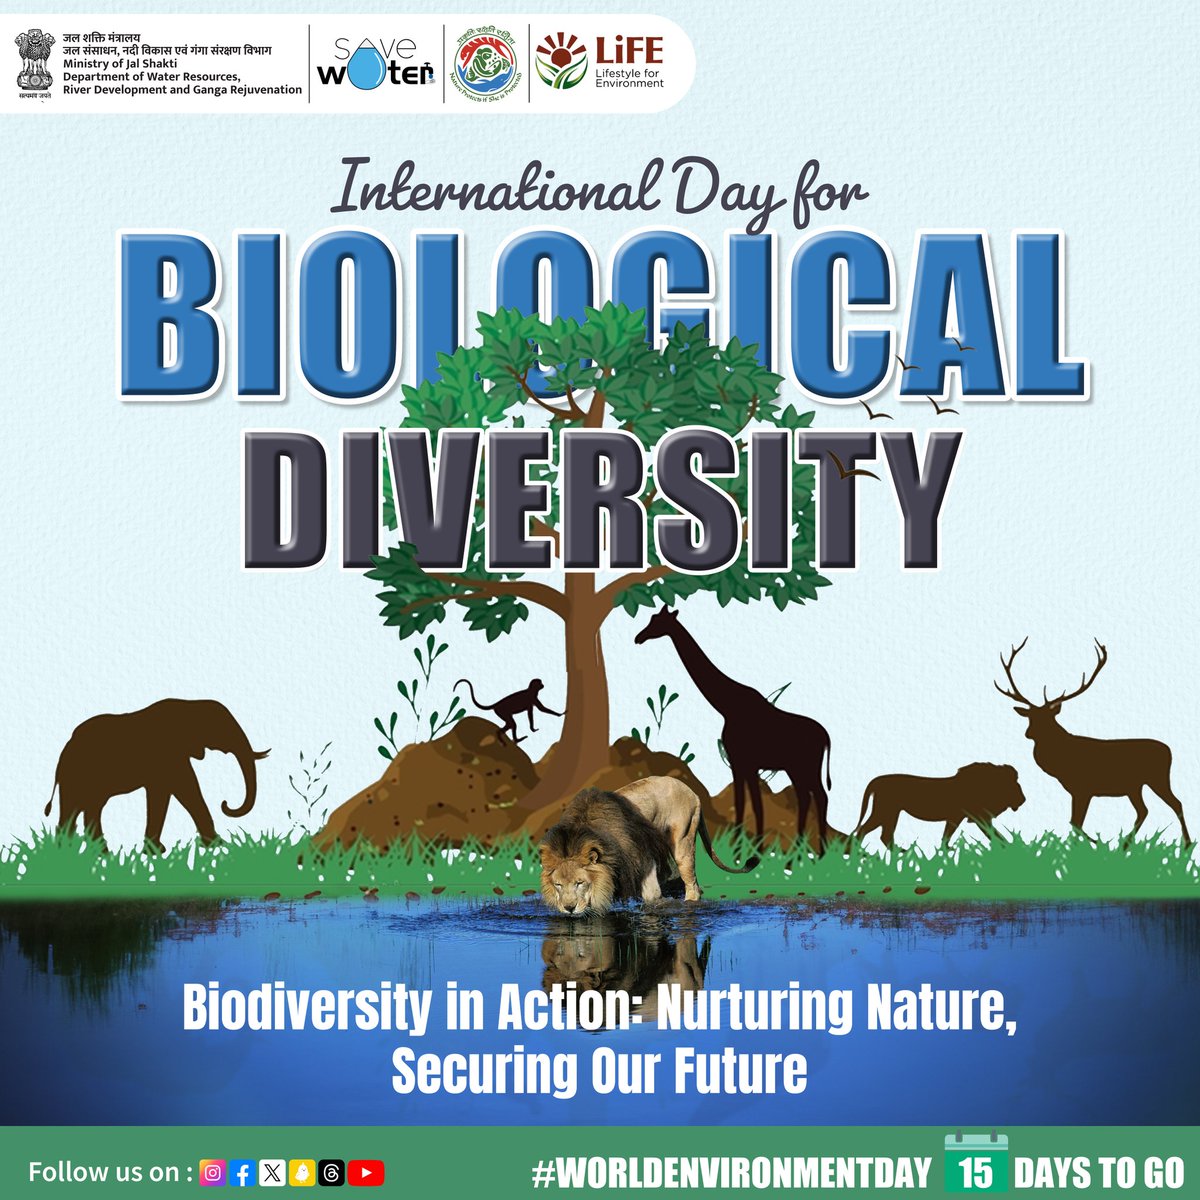 Hey nature lovers! It's #BiodiversityDay, a time to celebrate the incredible richness of life on #Earth. But it's also a call to action: our planet's #biodiversity is under threat. On this #BiodiversityInAction day, let's commit to protecting and restoring our natural world.